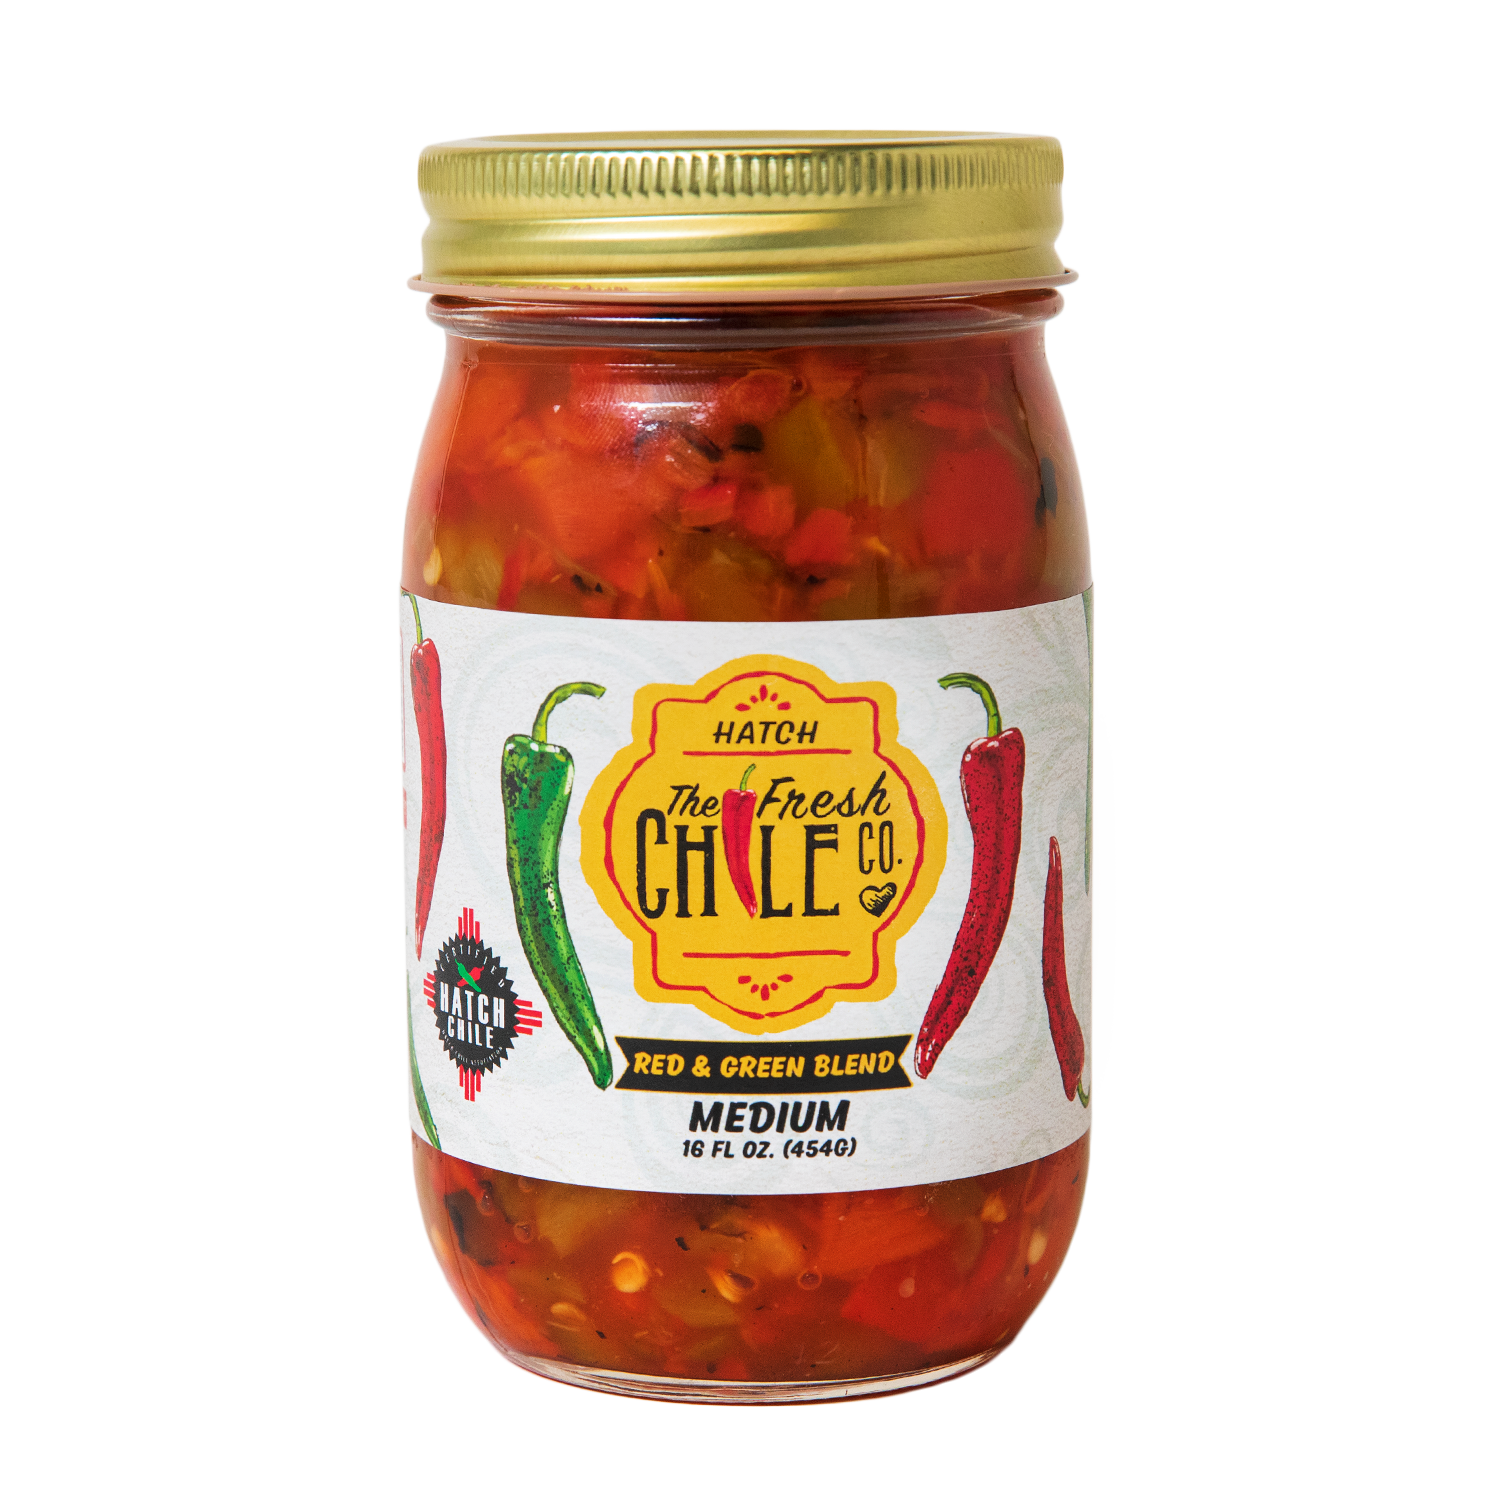 Hatch Chile 6-Pack - The Fresh Chile Company